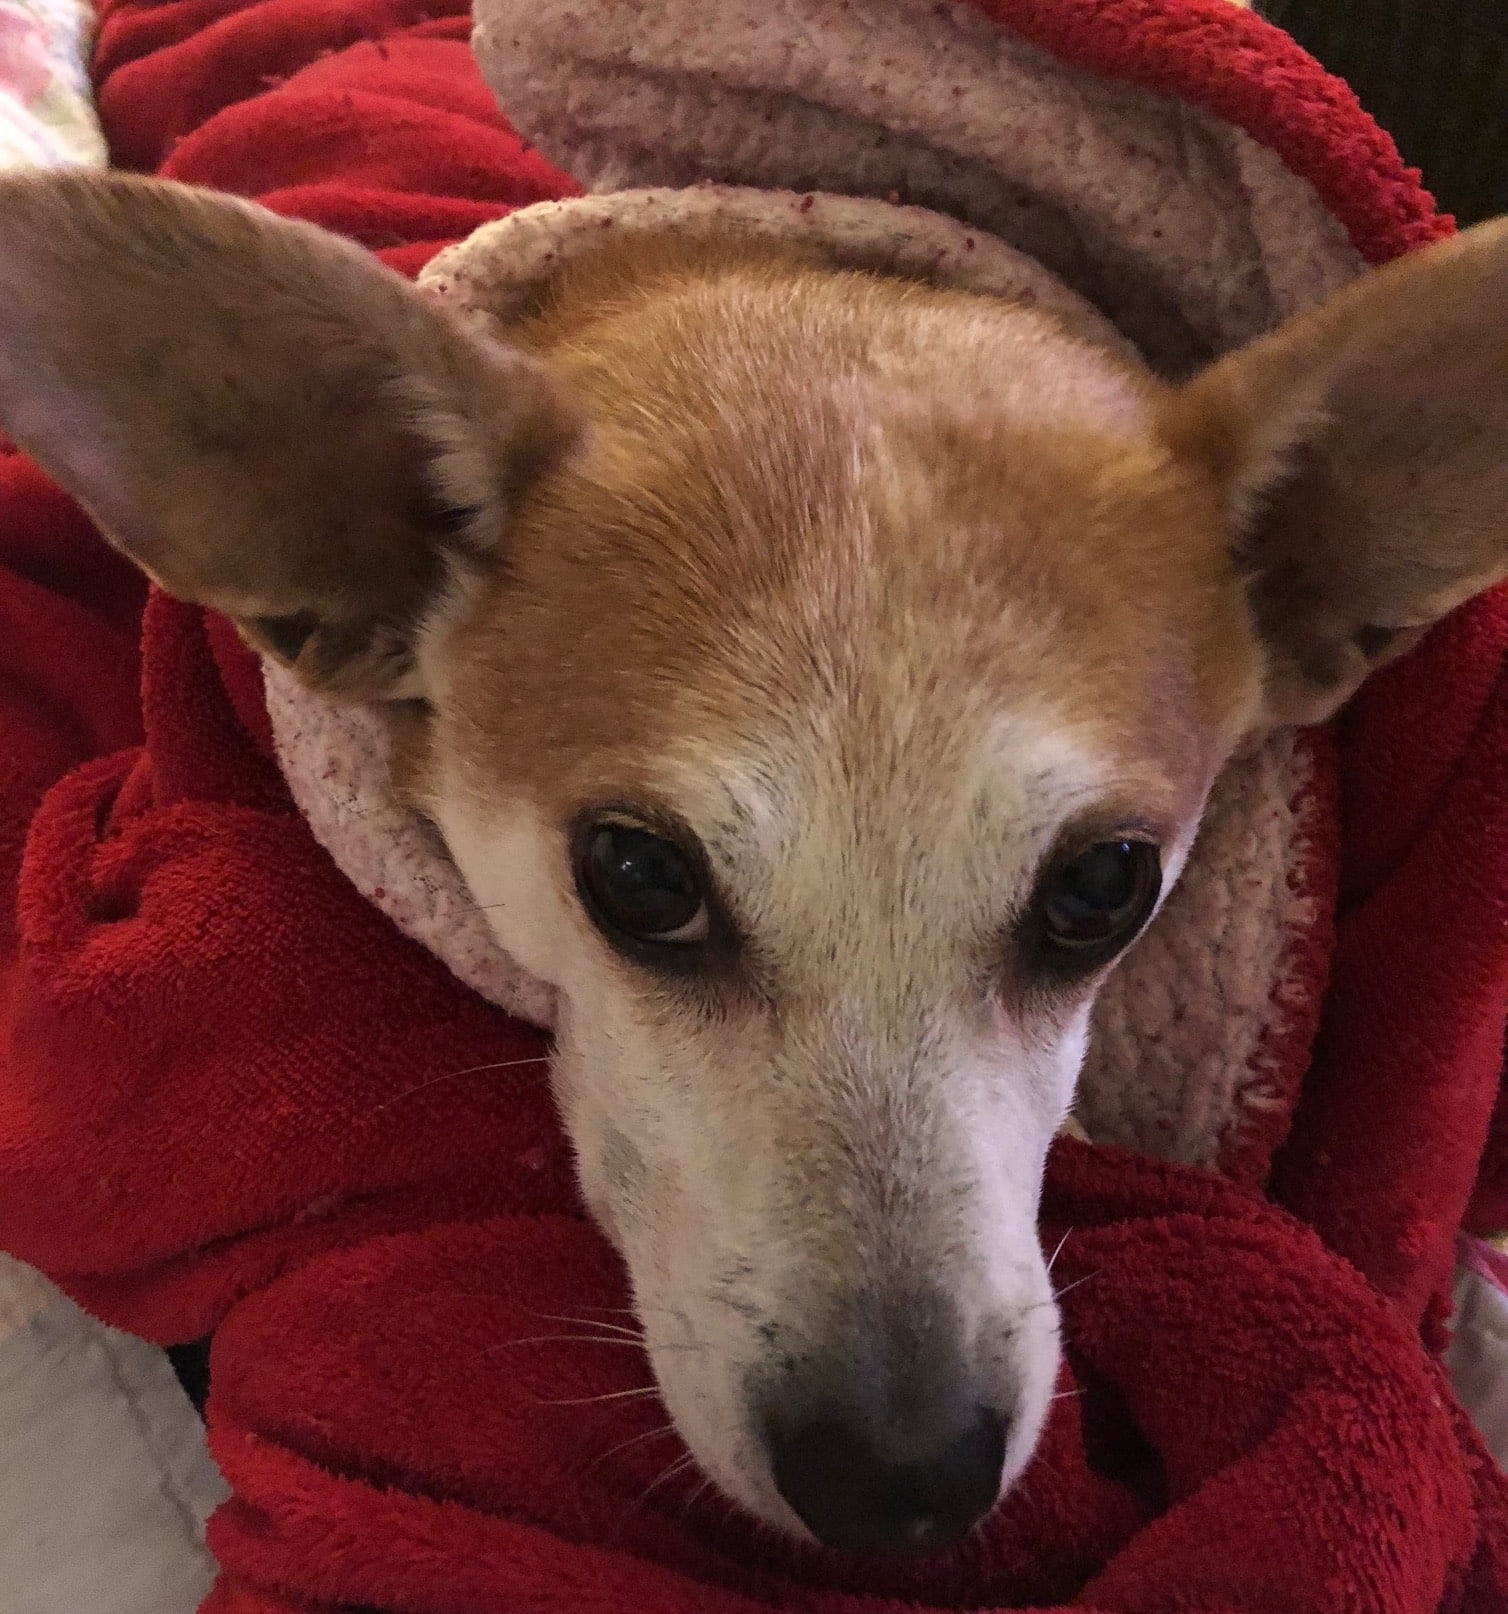 Small Chihuahua and Corgi mix dog is wrapped in a red blanket like a burrito